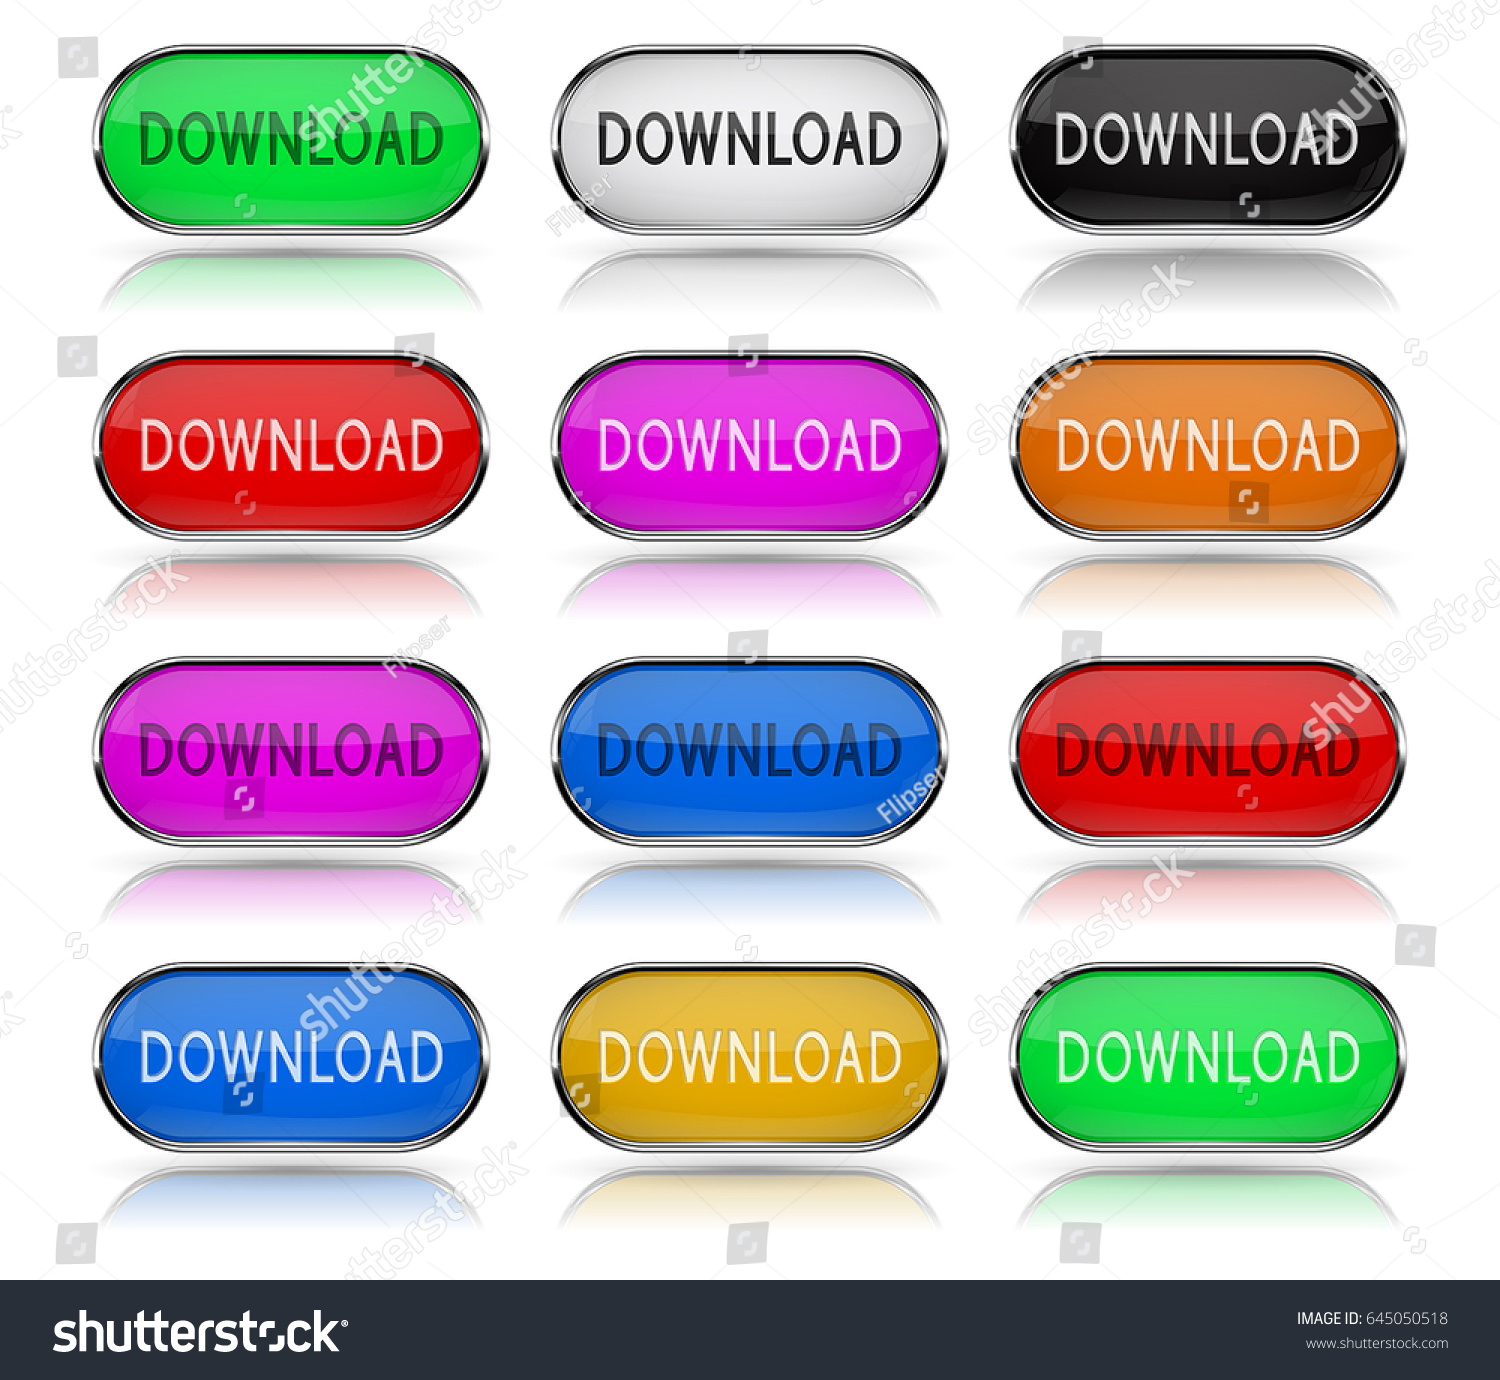 DOWNLOAD colored buttons. Pairs of normal and active icons. Vector 3d illustration #645050518